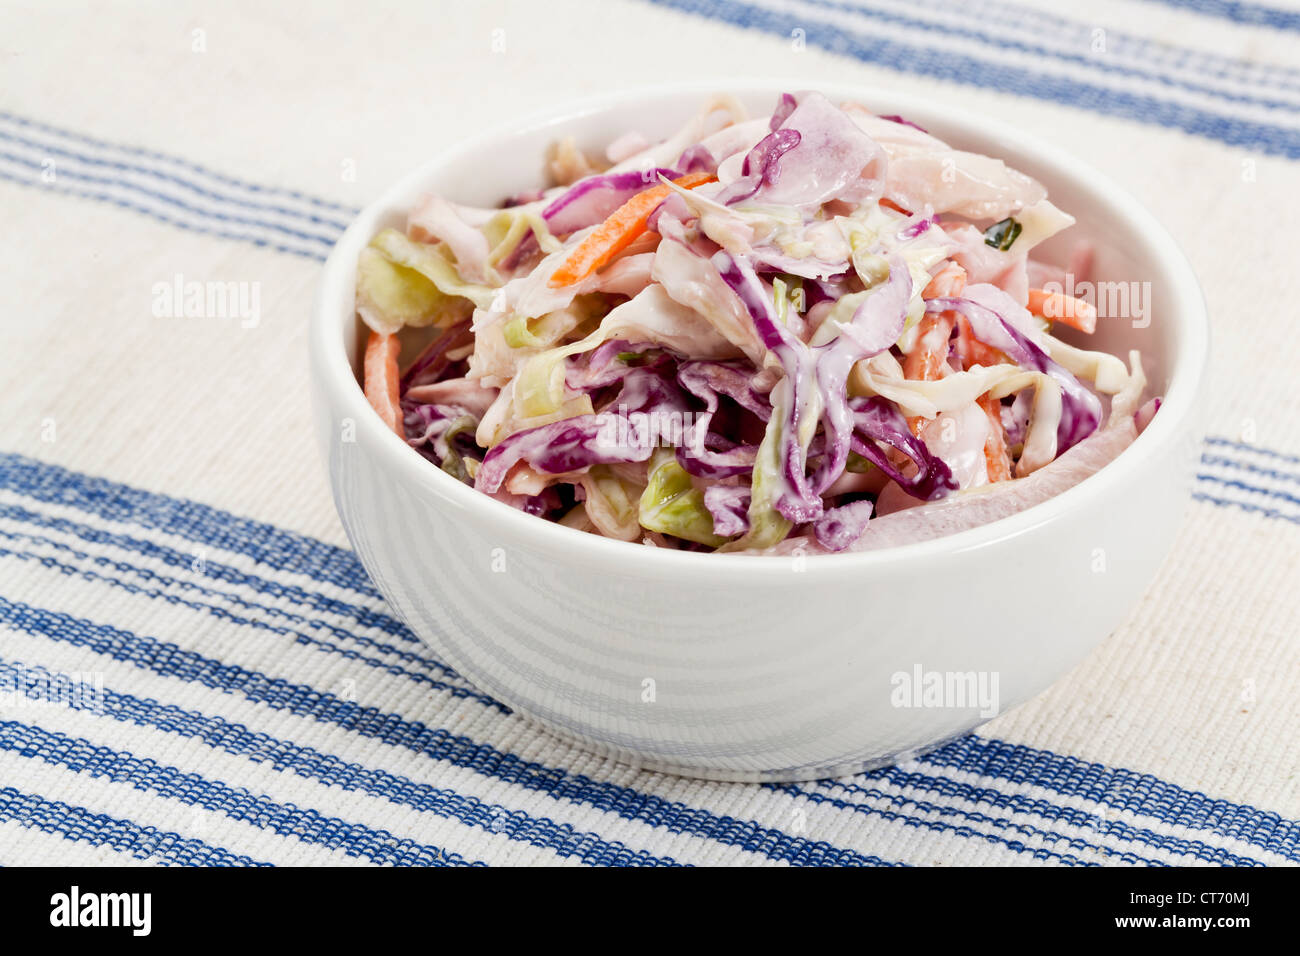 bowl of coleslaw salad - side dish on a tablecloth Stock Photo